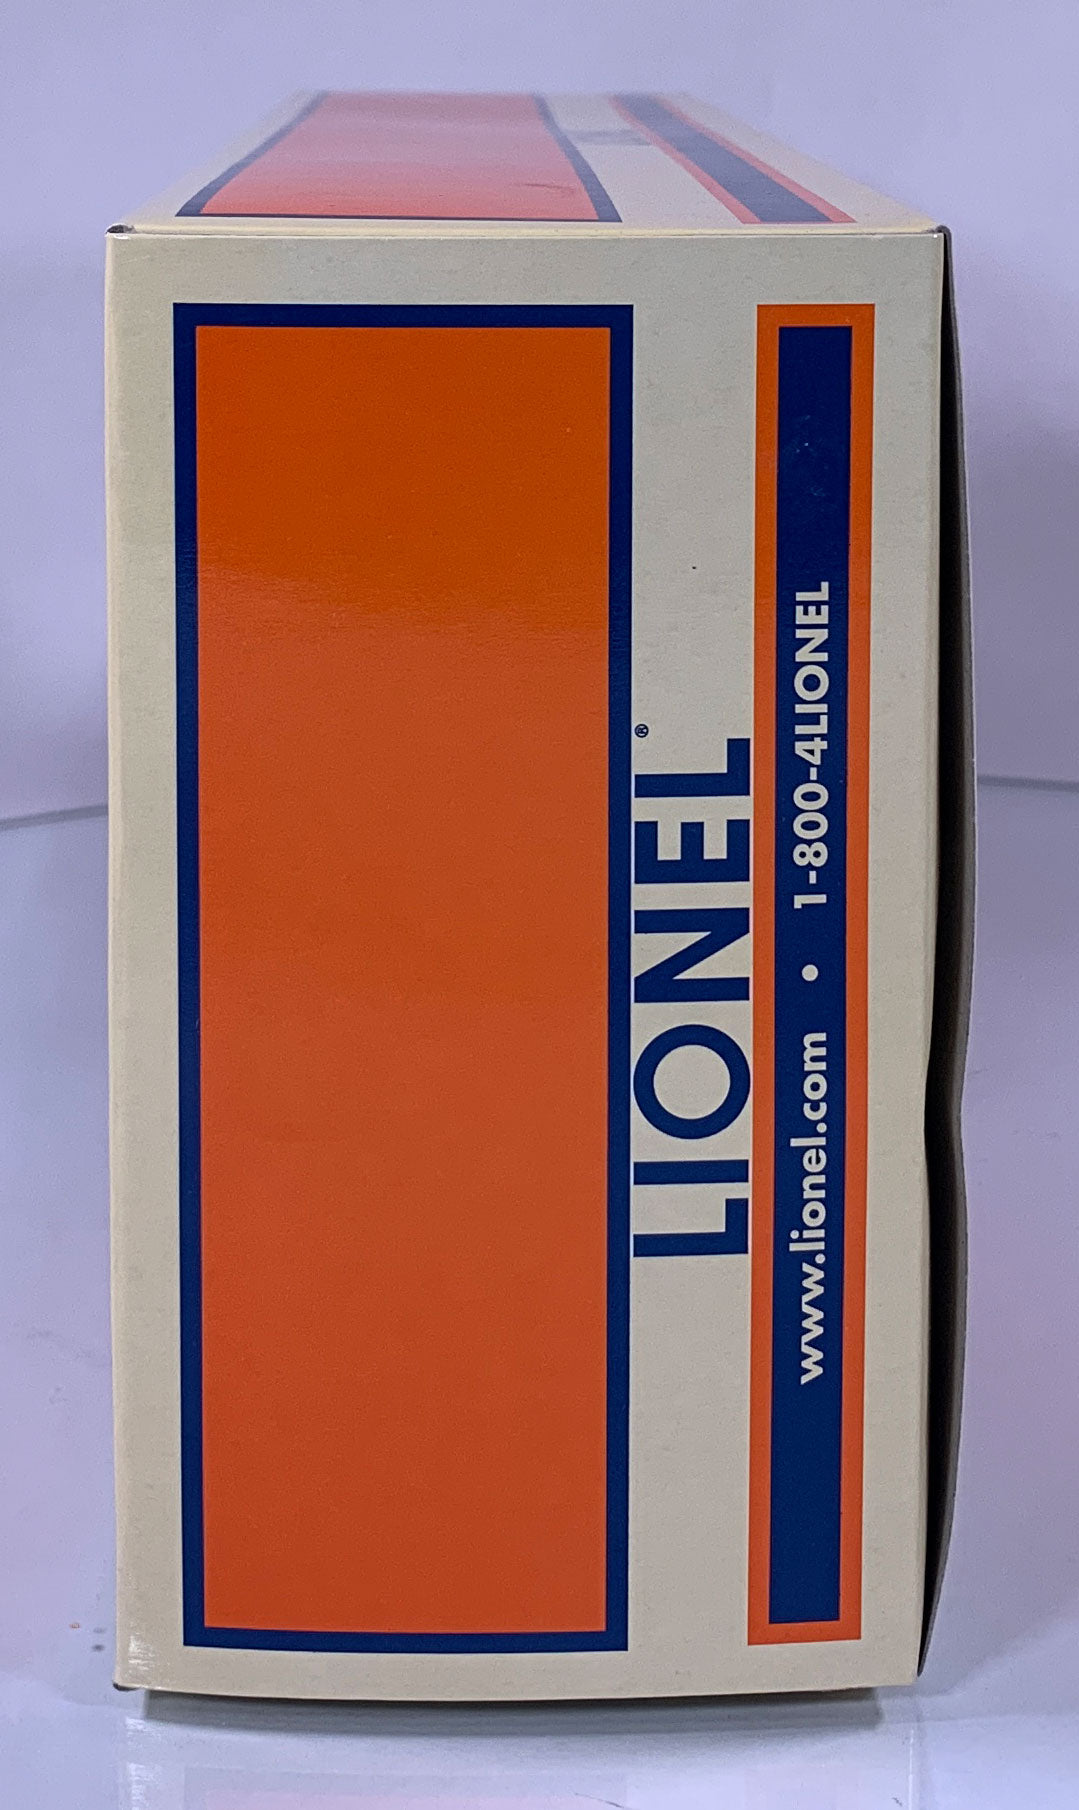 LIONEL • O GAUGE • 2006 Domino Sugar Operating Boxcar 6-26864 • NEW OLD STOCK